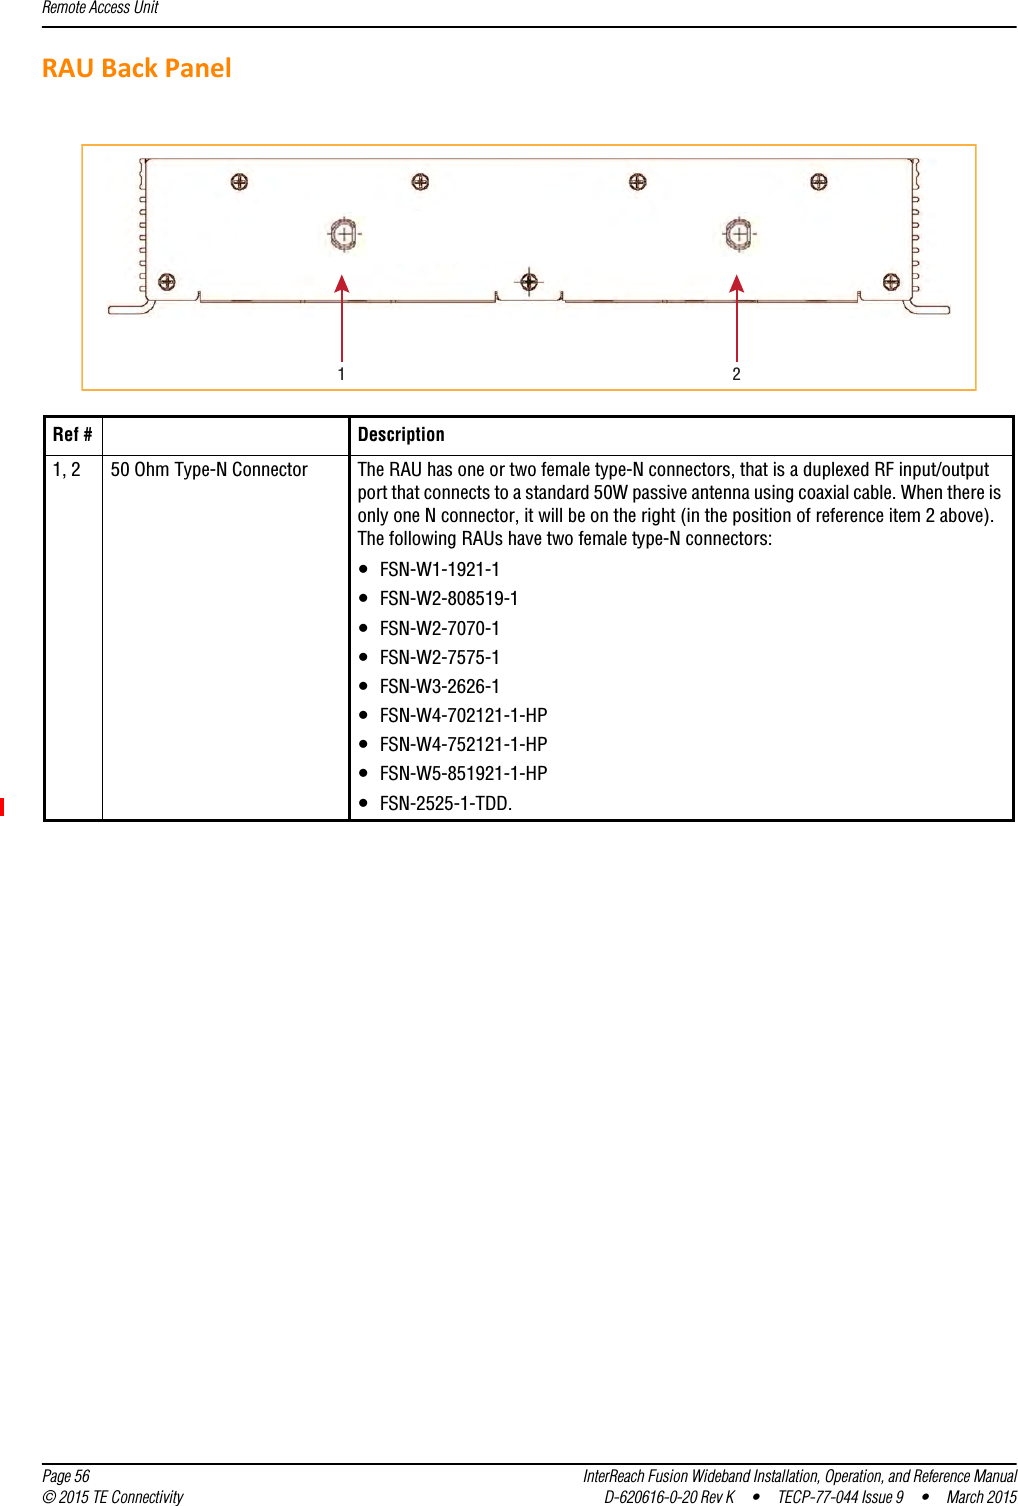 Remote Access Unit  Page 56 InterReach Fusion Wideband Installation, Operation, and Reference Manual© 2015 TE Connectivity D-620616-0-20 Rev K  •  TECP-77-044 Issue 9  •  March 2015RAU Back PanelRef # Description1, 2 50 Ohm Type-N Connector The RAU has one or two female type-N connectors, that is a duplexed RF input/output port that connects to a standard 50W passive antenna using coaxial cable. When there is only one N connector, it will be on the right (in the position of reference item 2 above).The following RAUs have two female type-N connectors:•FSN-W1-1921-1•FSN-W2-808519-1•FSN-W2-7070-1•FSN-W2-7575-1•FSN-W3-2626-1•FSN-W4-702121-1-HP•FSN-W4-752121-1-HP•FSN-W5-851921-1-HP•FSN-2525-1-TDD.12